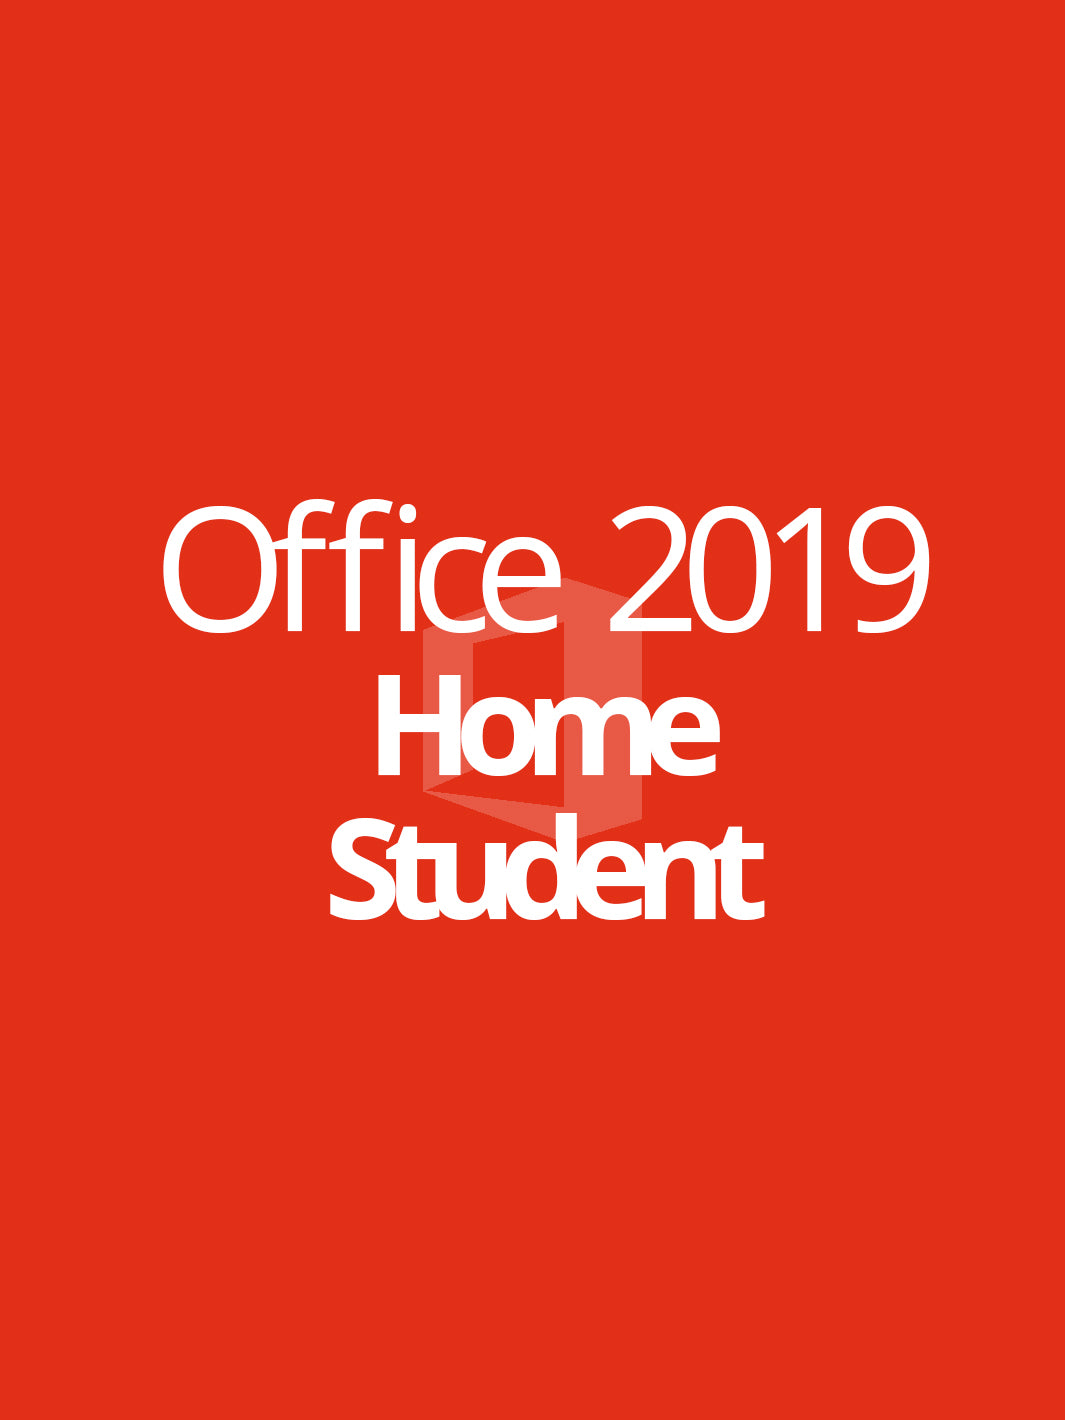 Buy Office 2019 Home & Student Key, Instant Delivery